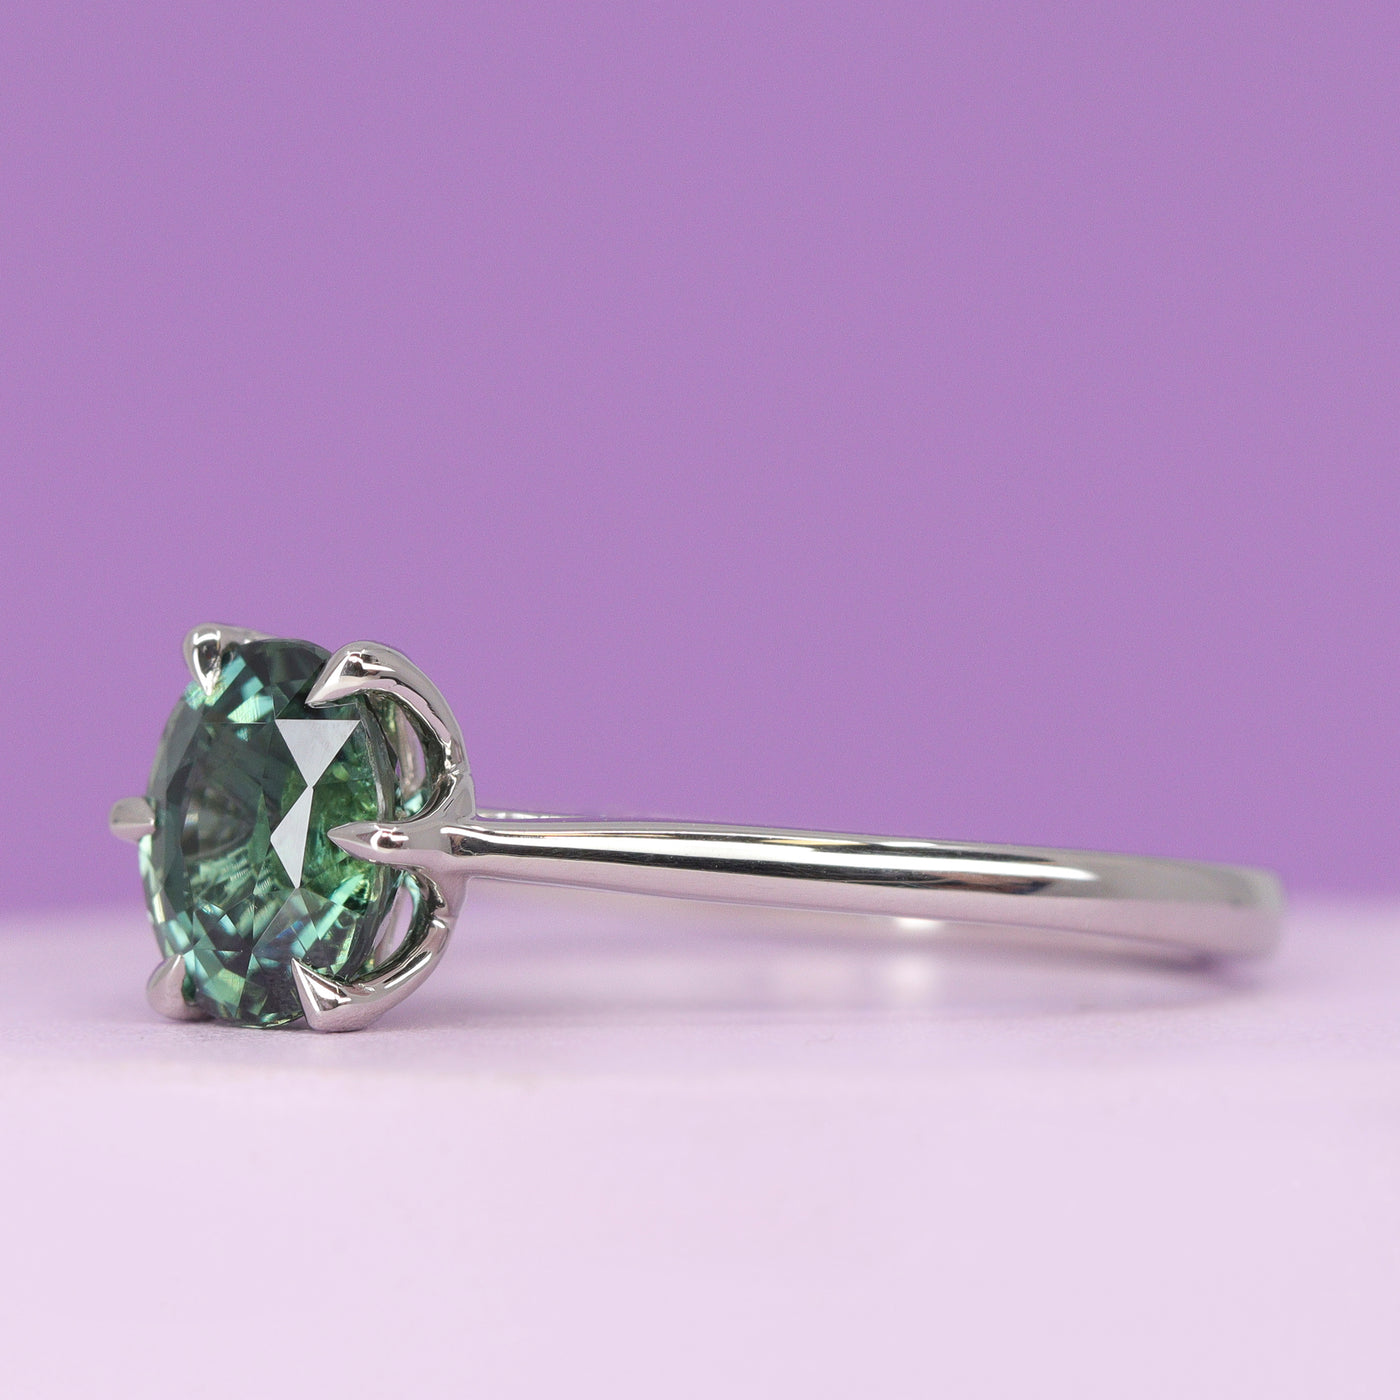 Raine - Oval Cut Teal Sapphire Solitaire Ring with Lotus Flower Inspired Setting - Made-To-Order